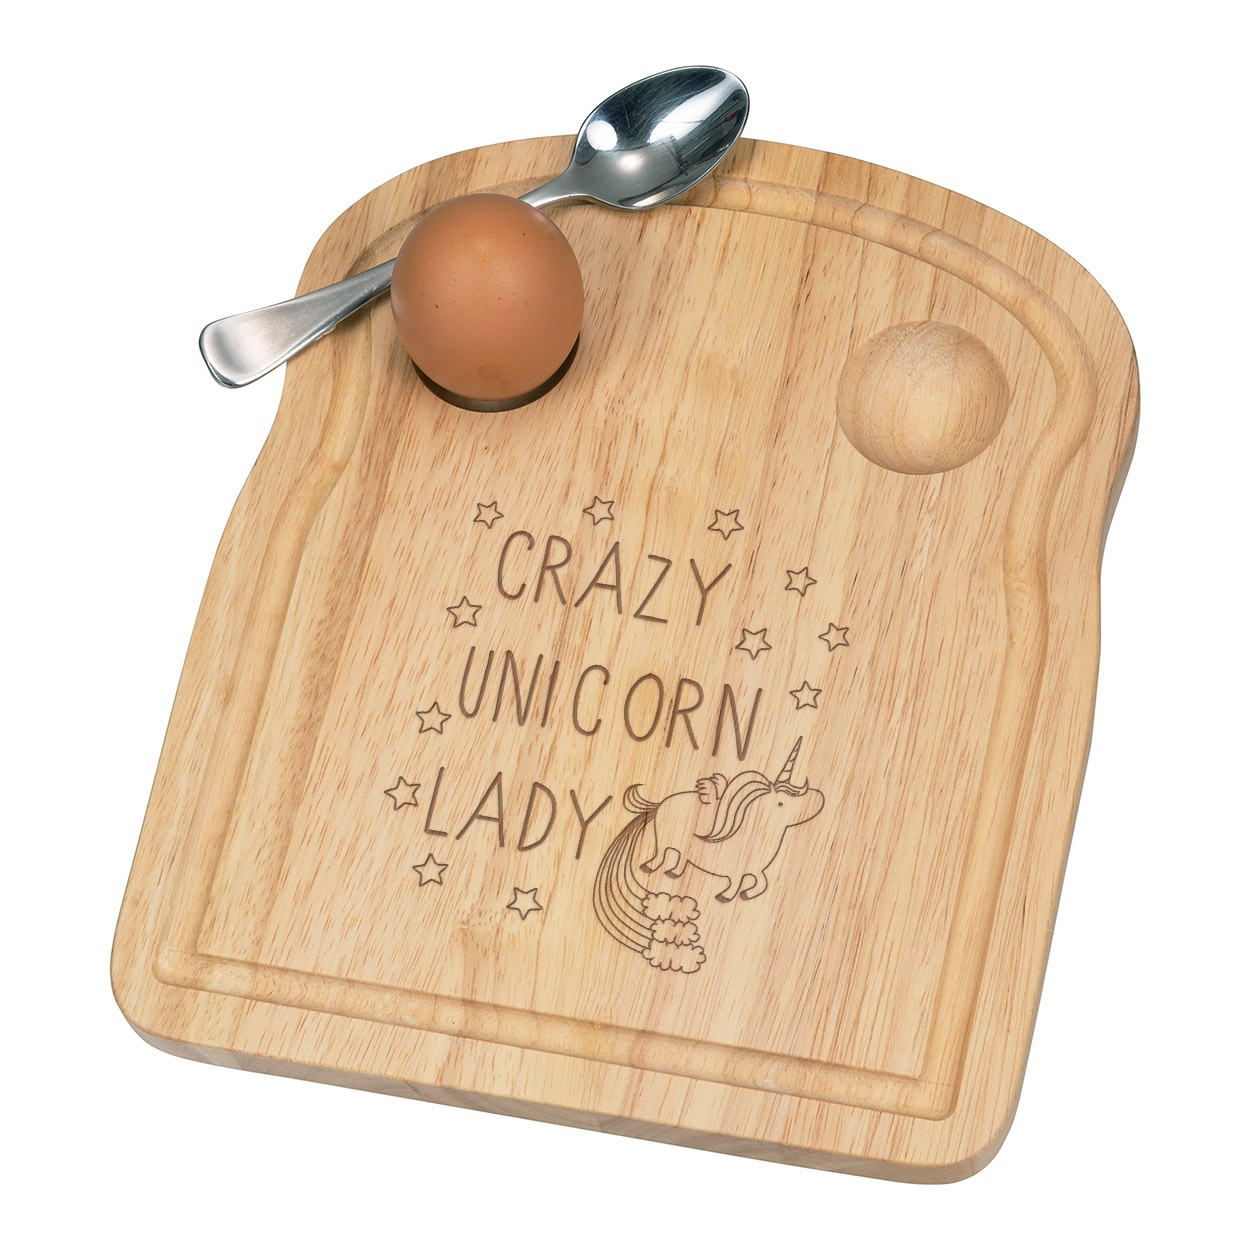 Crazy Unicorn Lady Breakfast Dippy Egg Cup Board Wooden